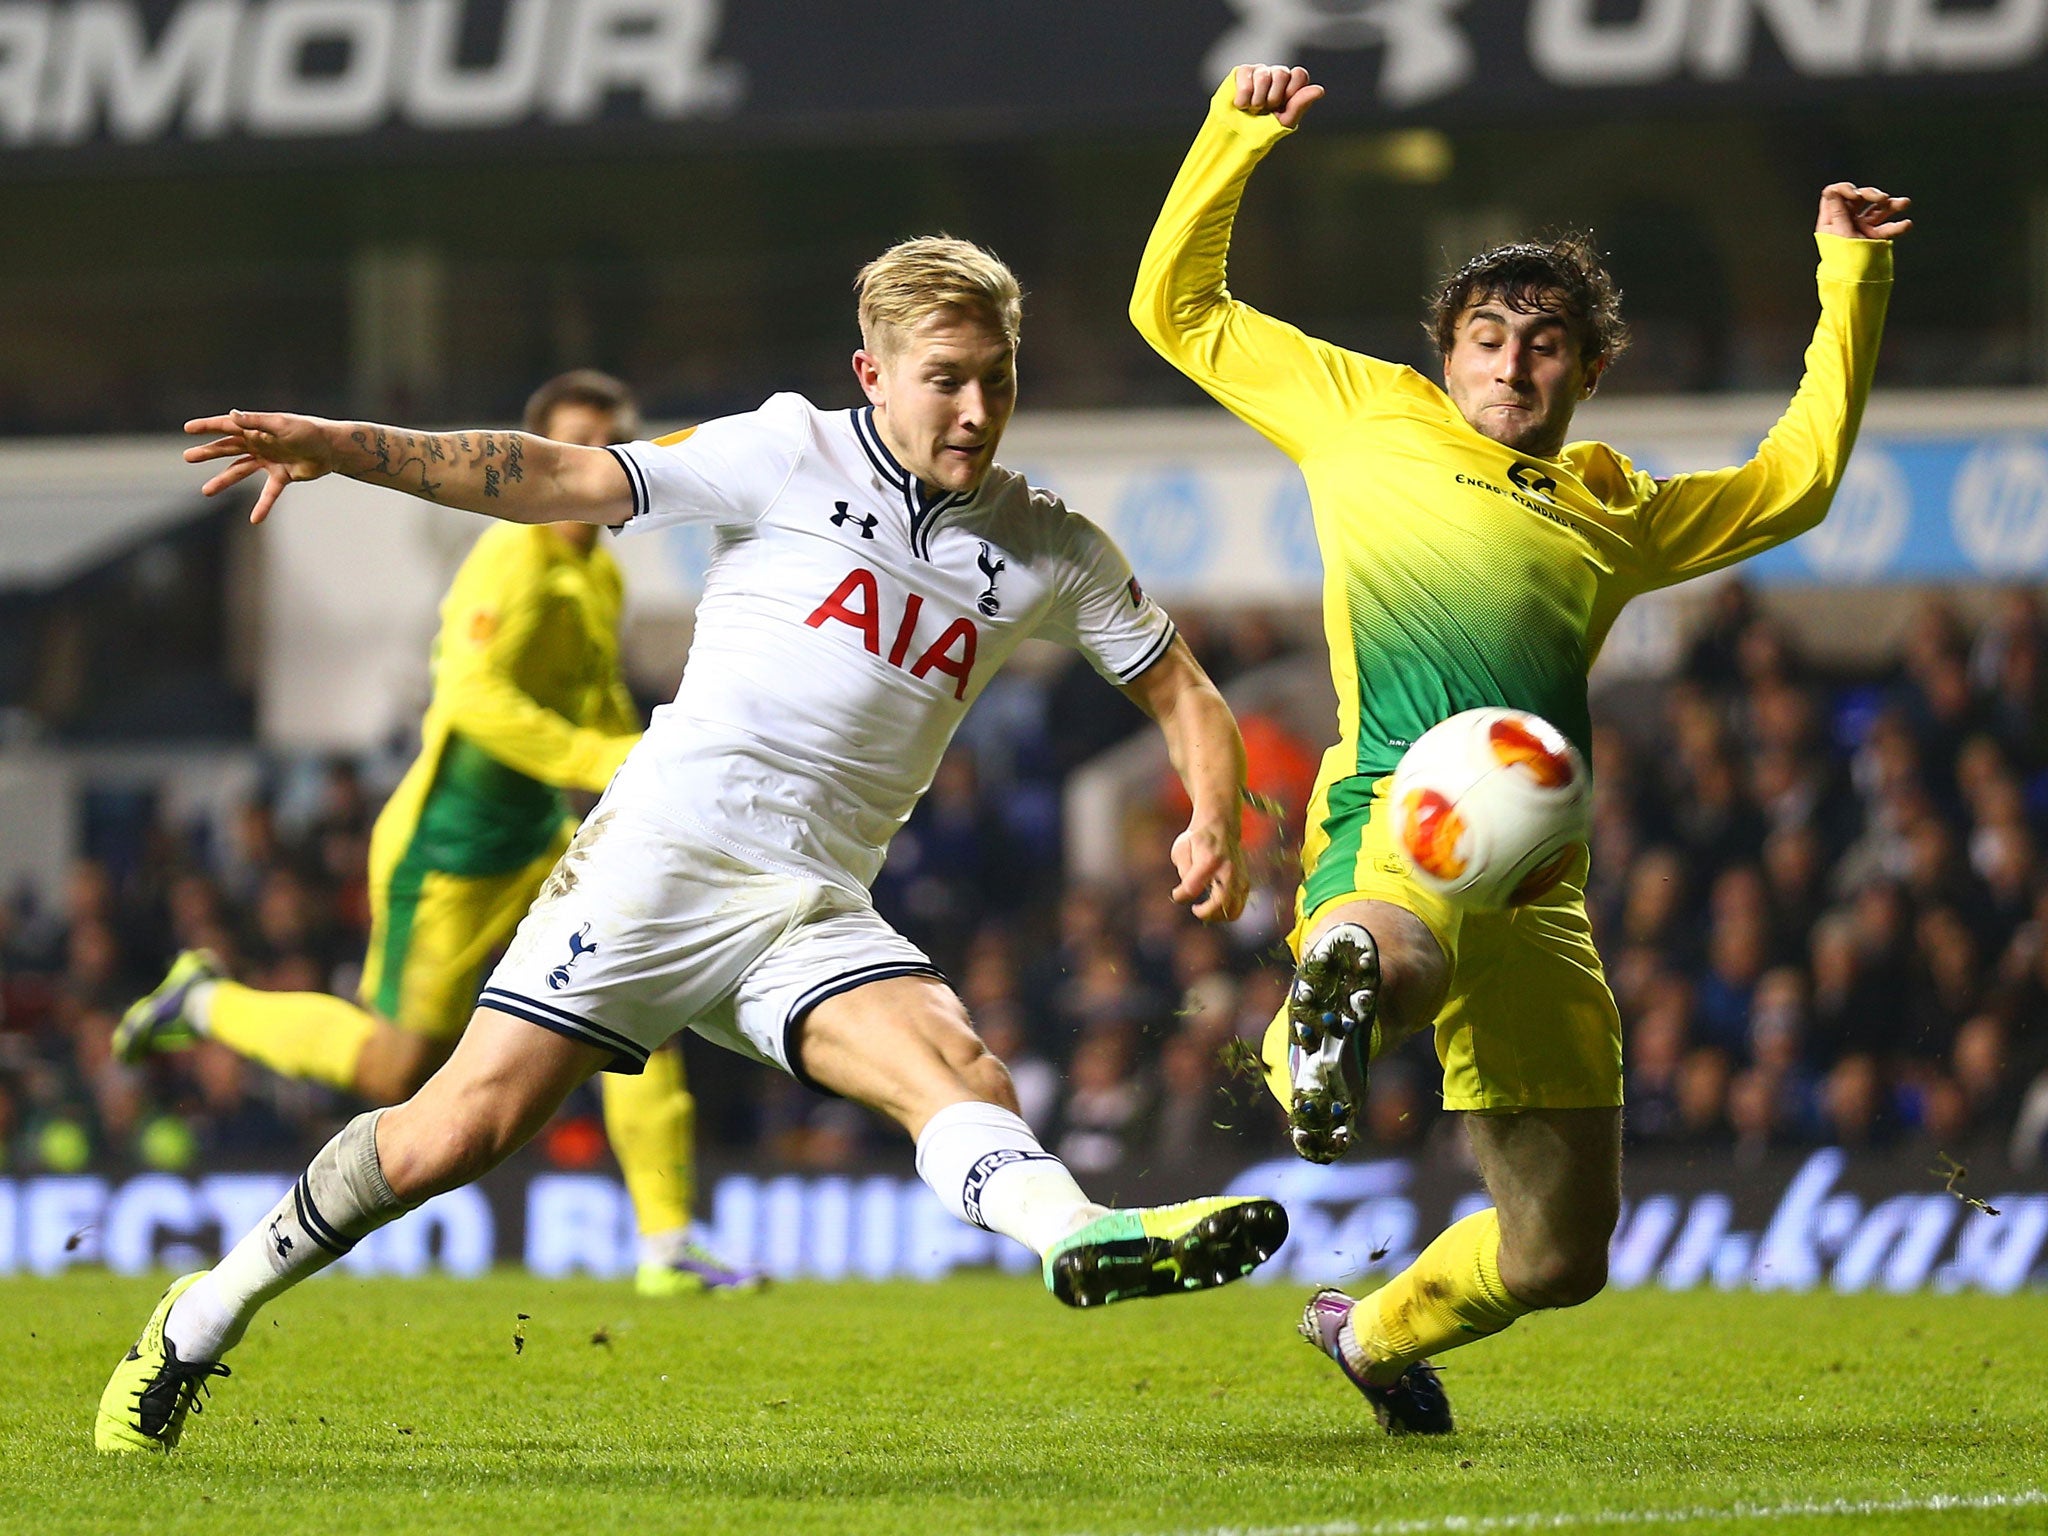 Lewis Holtby gets on the end of an Andros Townsend pass to score against Anzhi Makhachkala